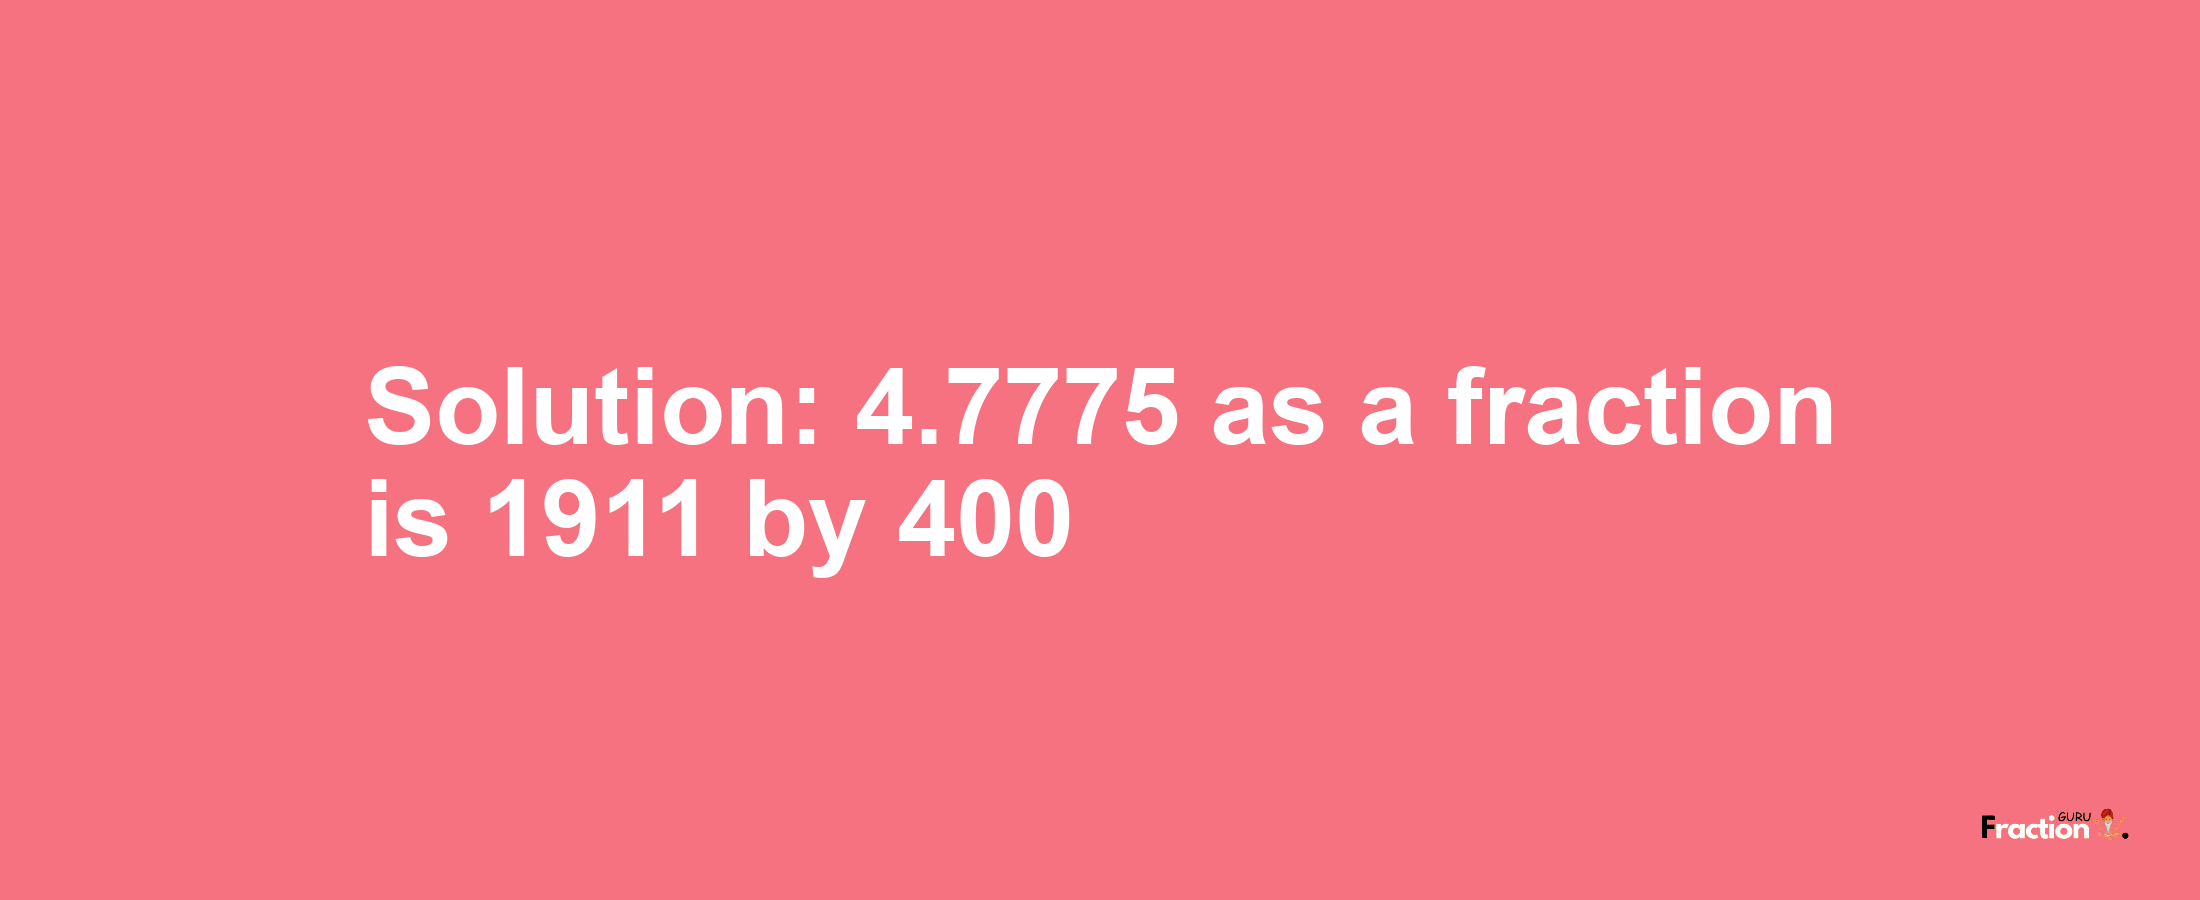 Solution:4.7775 as a fraction is 1911/400